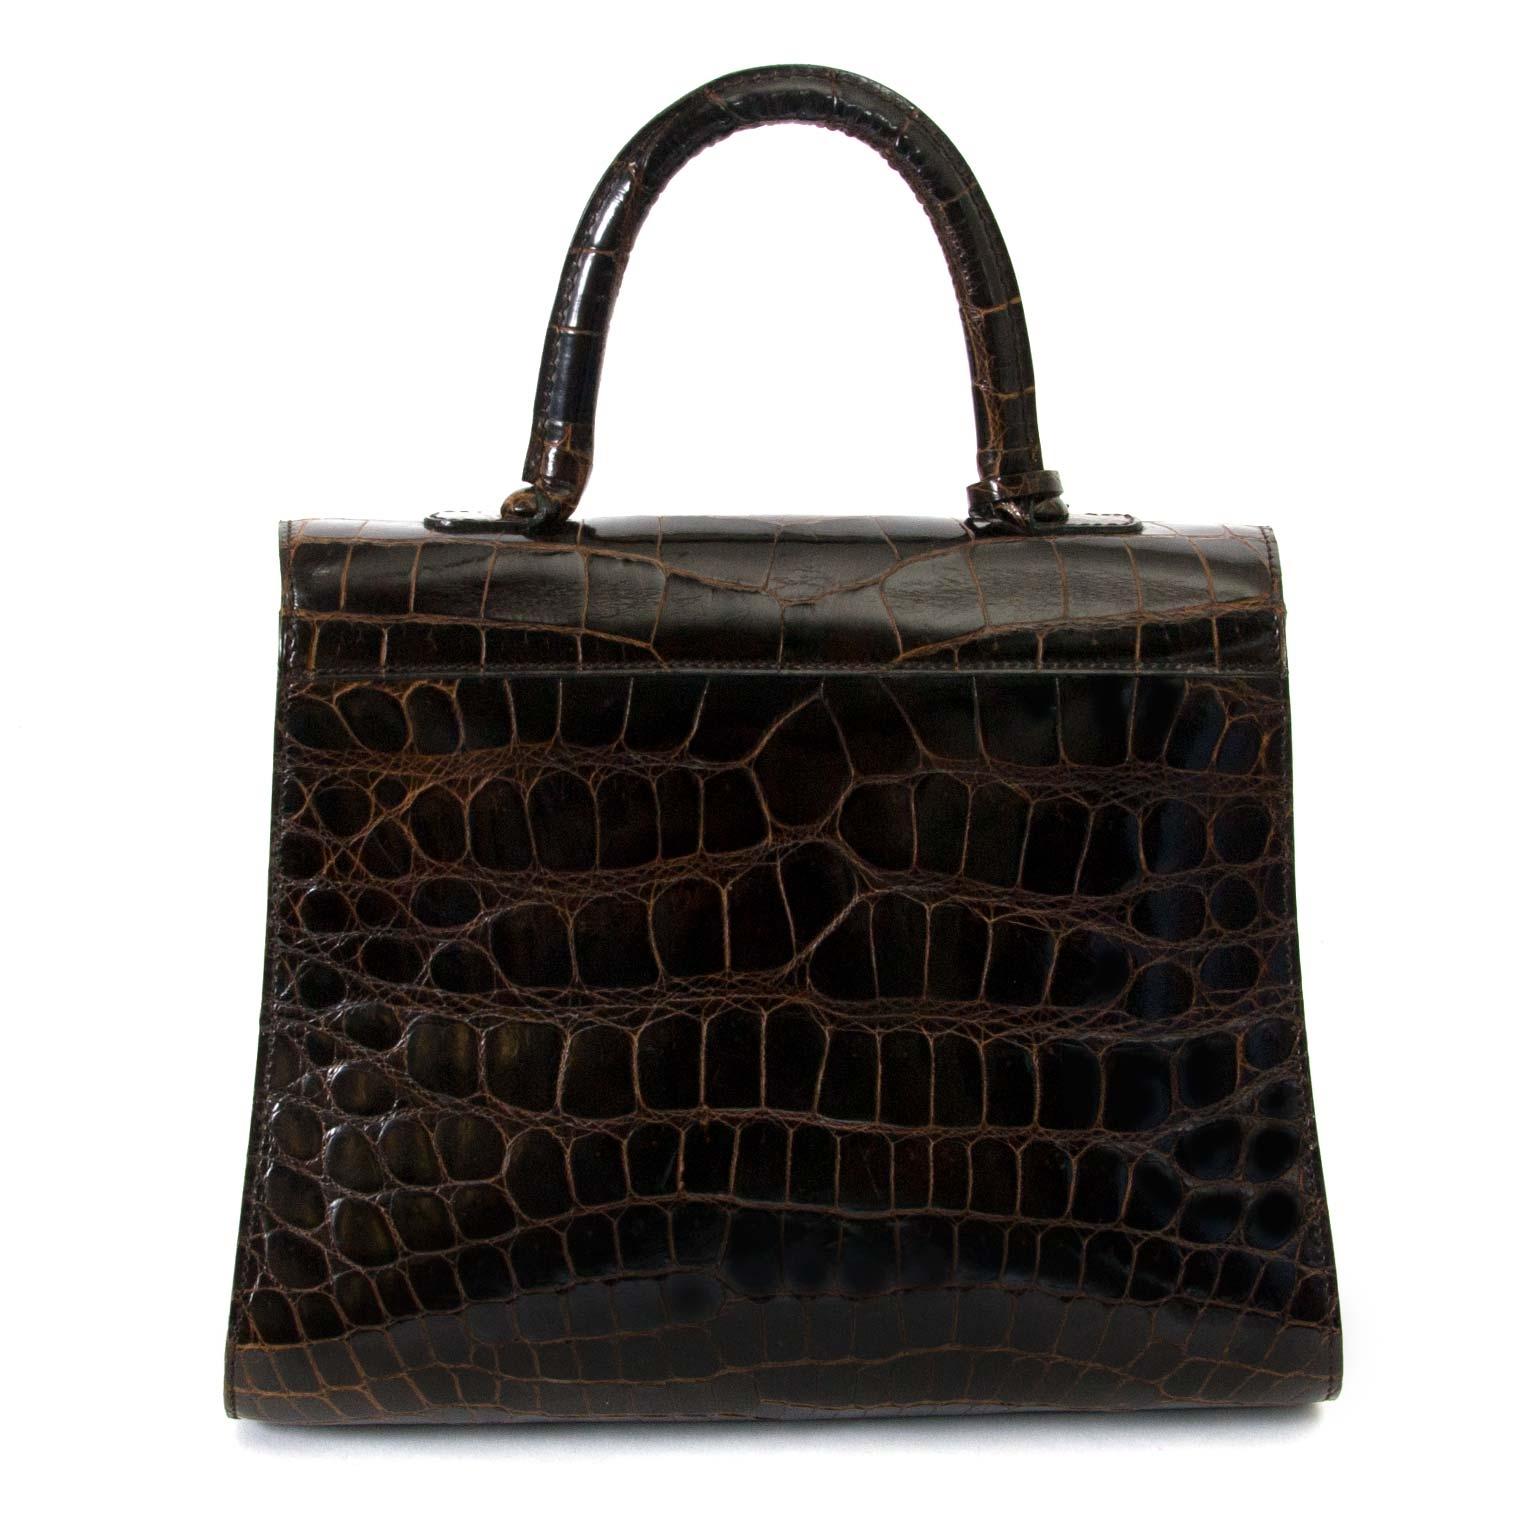 Very Good Preloved Condition

Delvaux Brown Croco Brillant MM

This iconic Delvaux bag comes in beautiful hunny brown shiny croco leather and is finished with gold-tone hardware.
The front flap contains the classic horseshoe belt buckle to open the